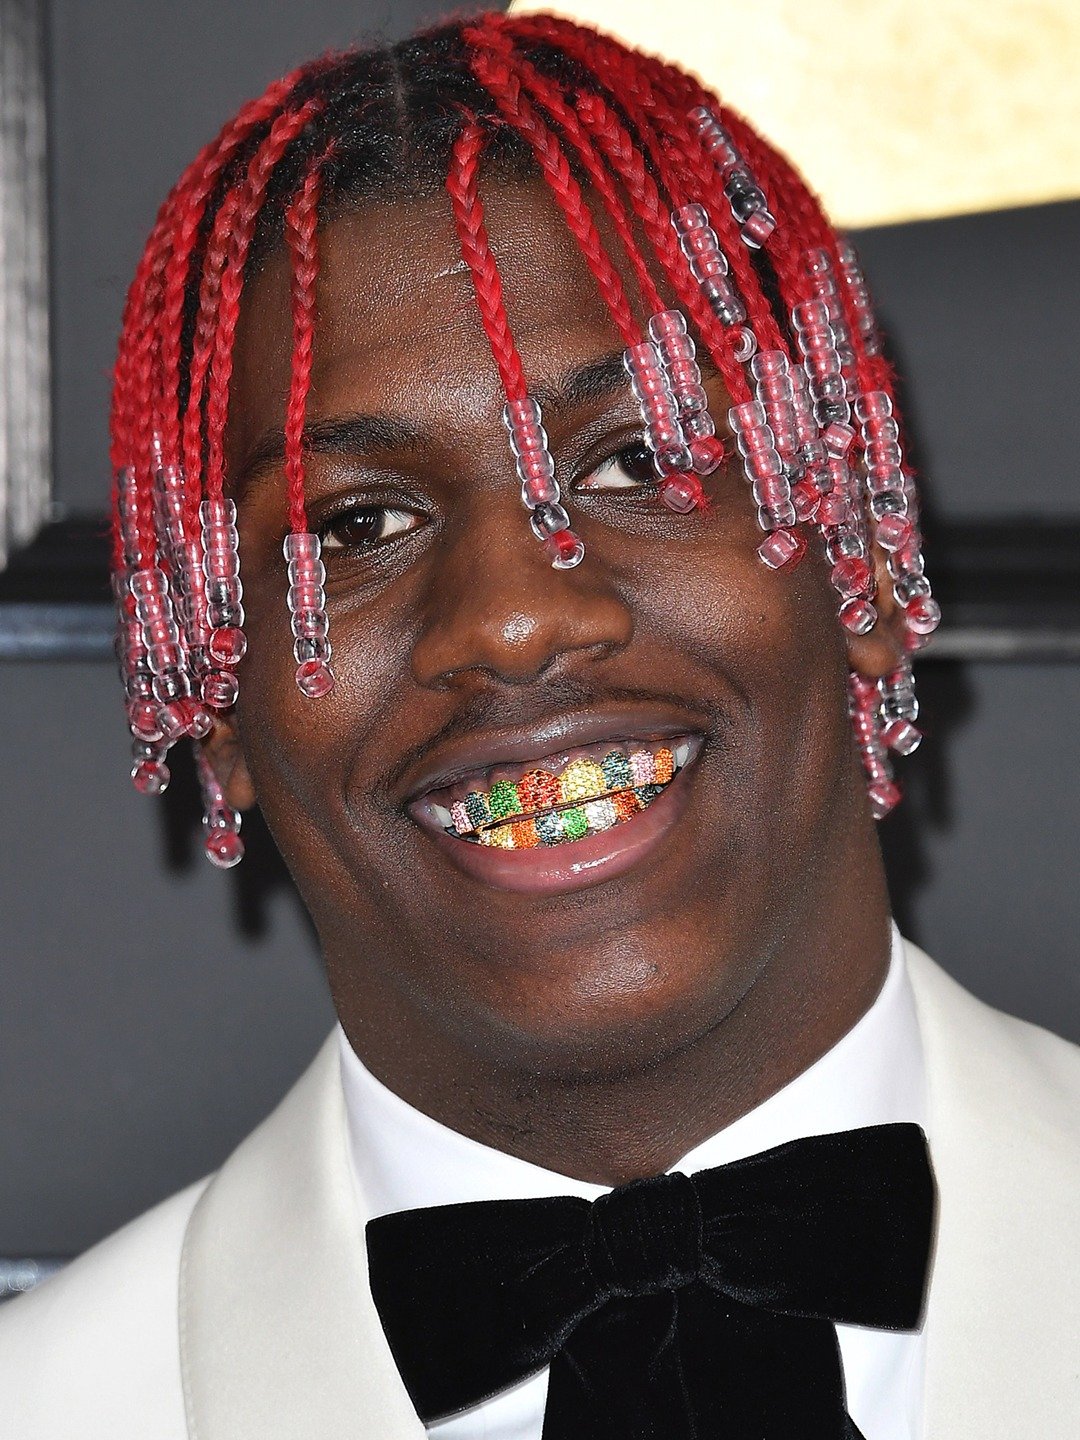 How tall is Lil Yachty?